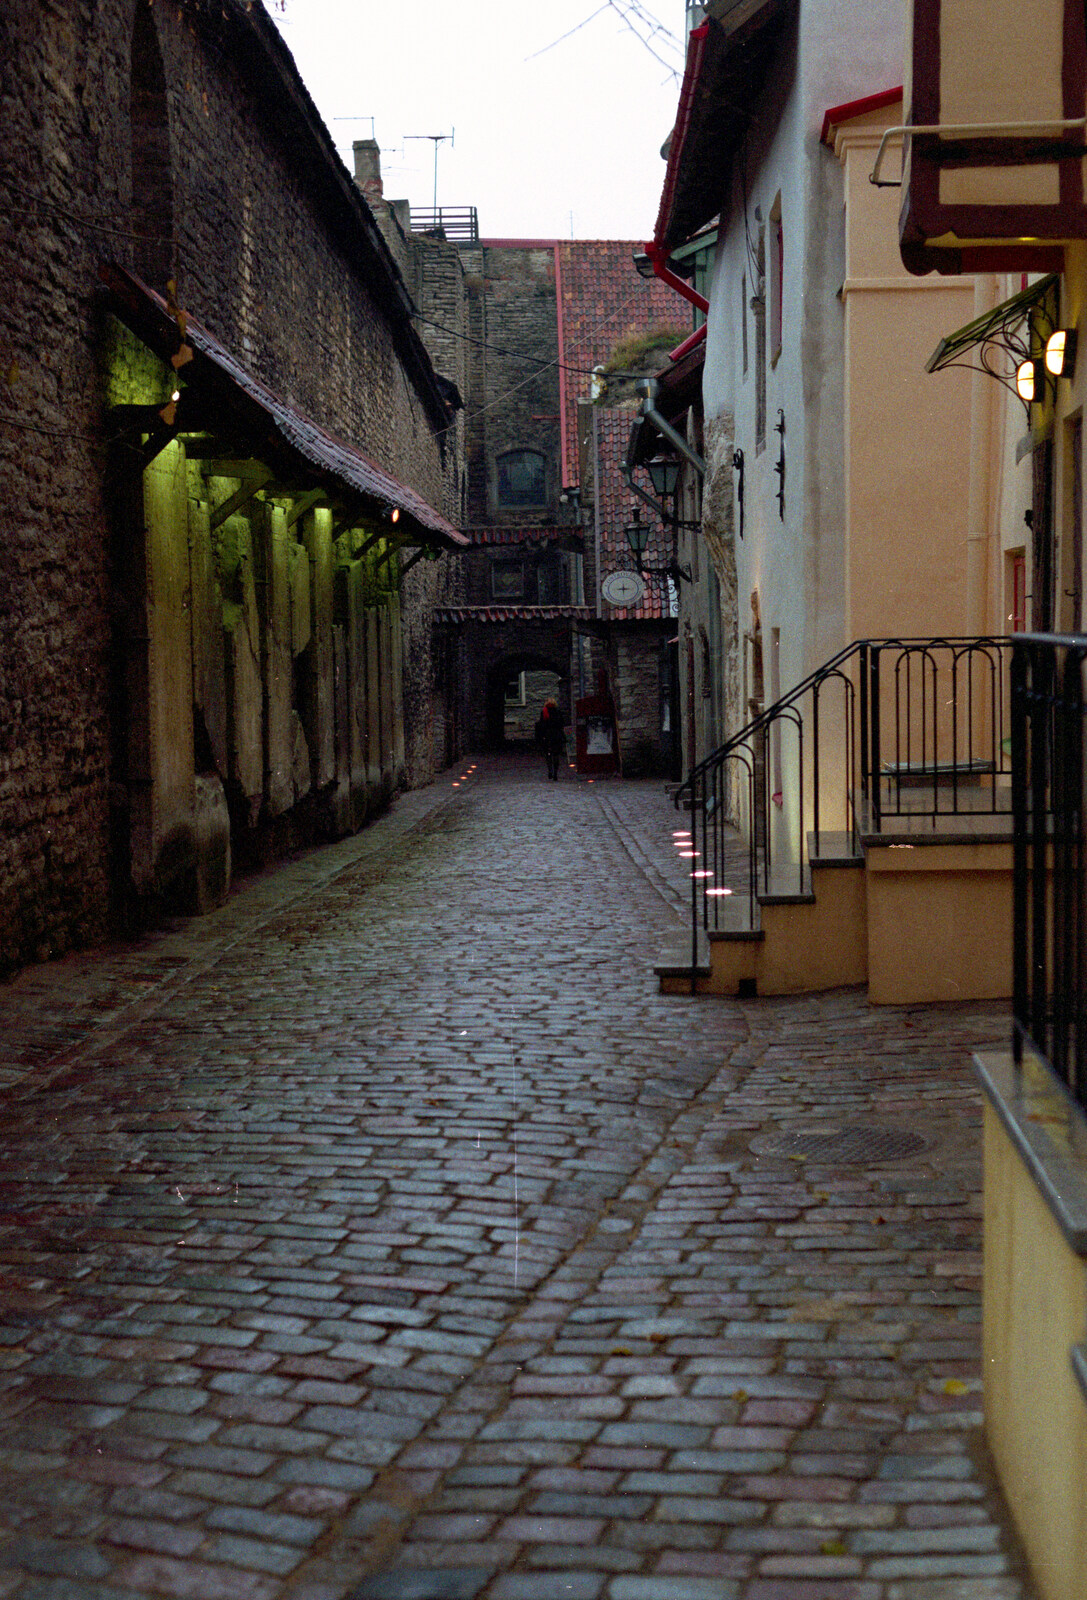 More cobbles from A Day Trip to Tallinn, Estonia - 2nd December 1999